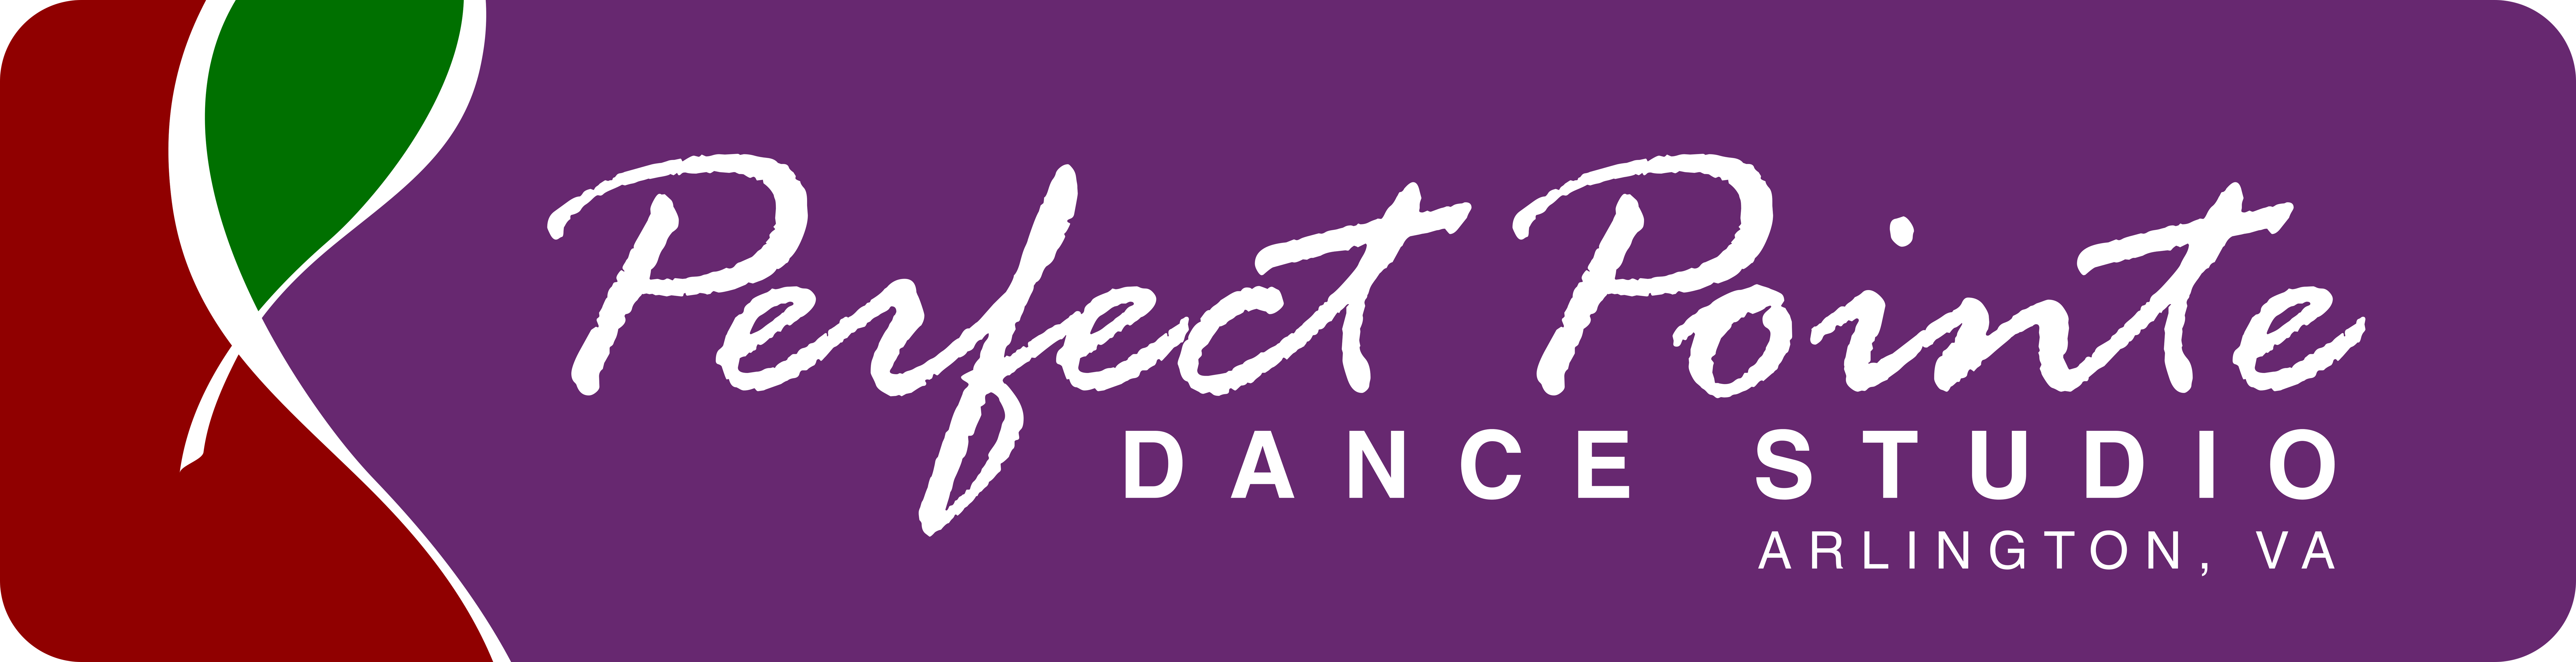 perfect pointe school of dance